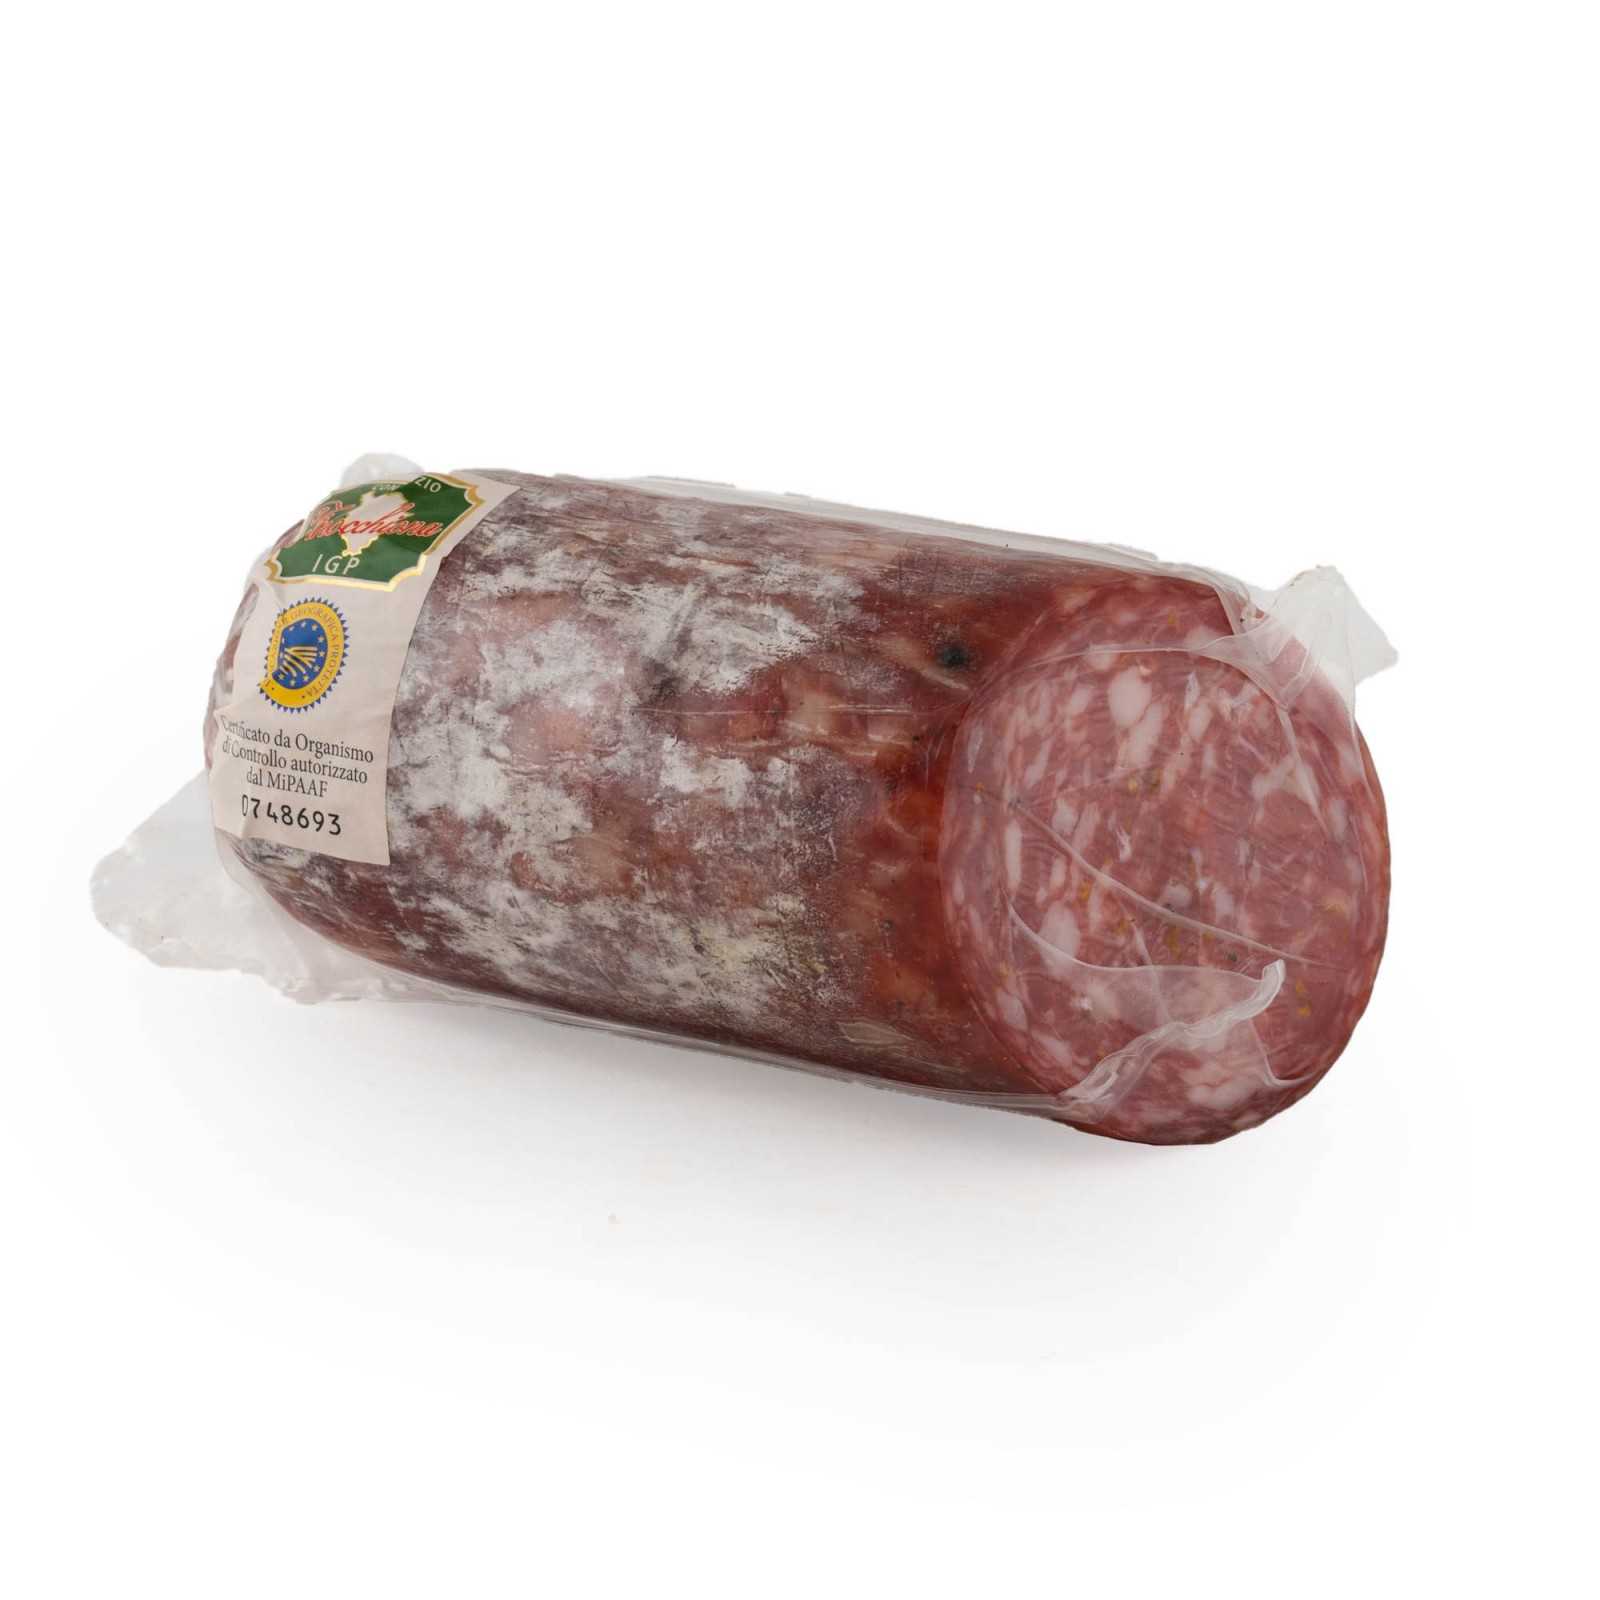 PGI Finocchiona is one of the most famous Tuscan cured meats. It is produced with pork of excellent quality, minced and kneaded, to which wild fennel seeds are added, which give it the characteristic fresh and at the same time intense aroma. This version of PGI Finocchiona has a net weight of about 400 g and is vacuum packed.